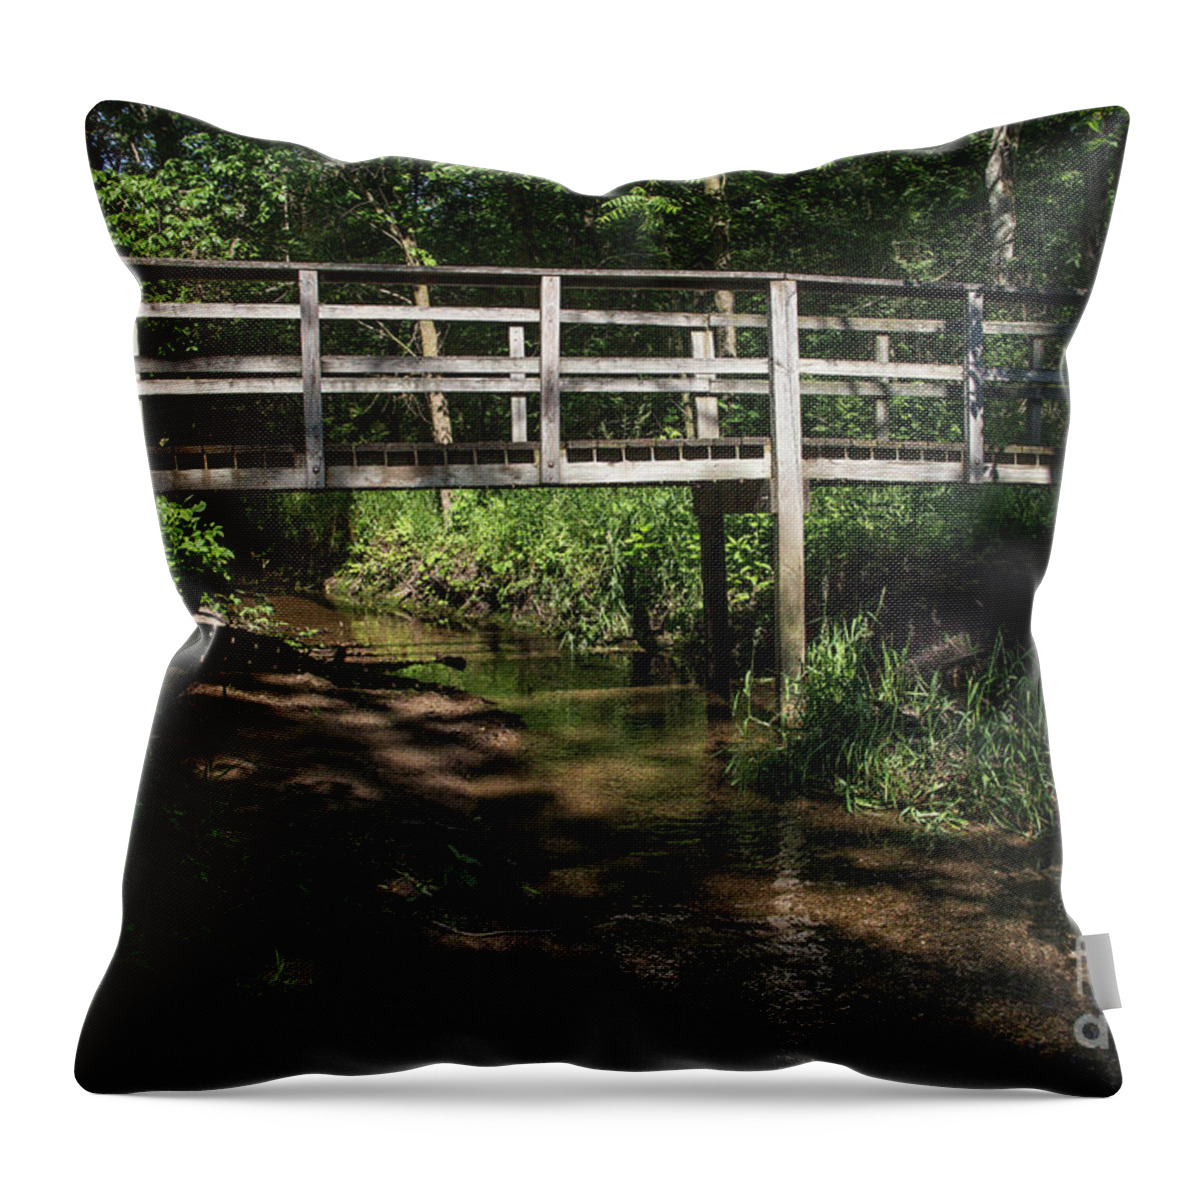 Bridge Throw Pillow featuring the photograph Small Bridge by Kathy McClure